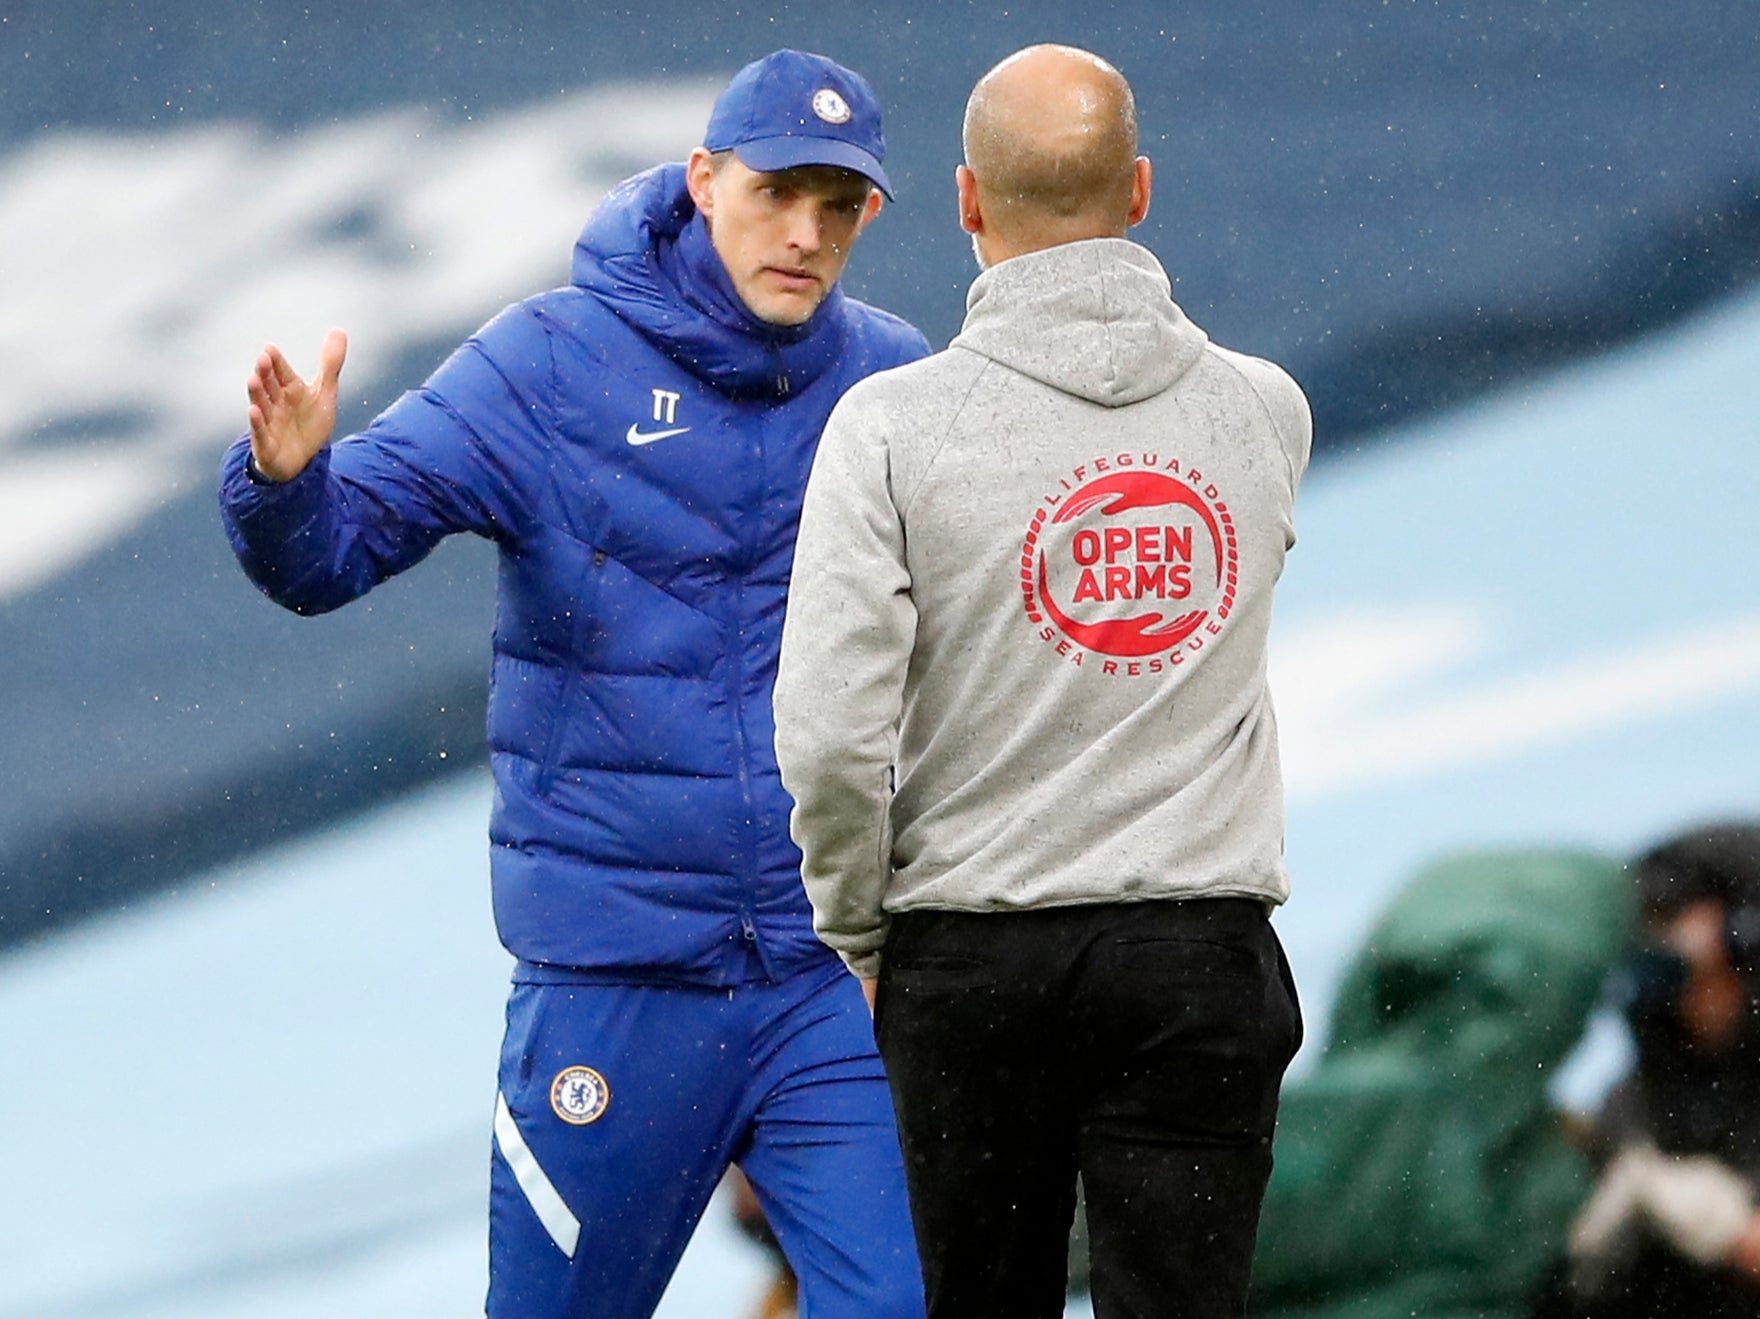 Chelsea and City managers Thomas Tuchel and Pep Guardiola